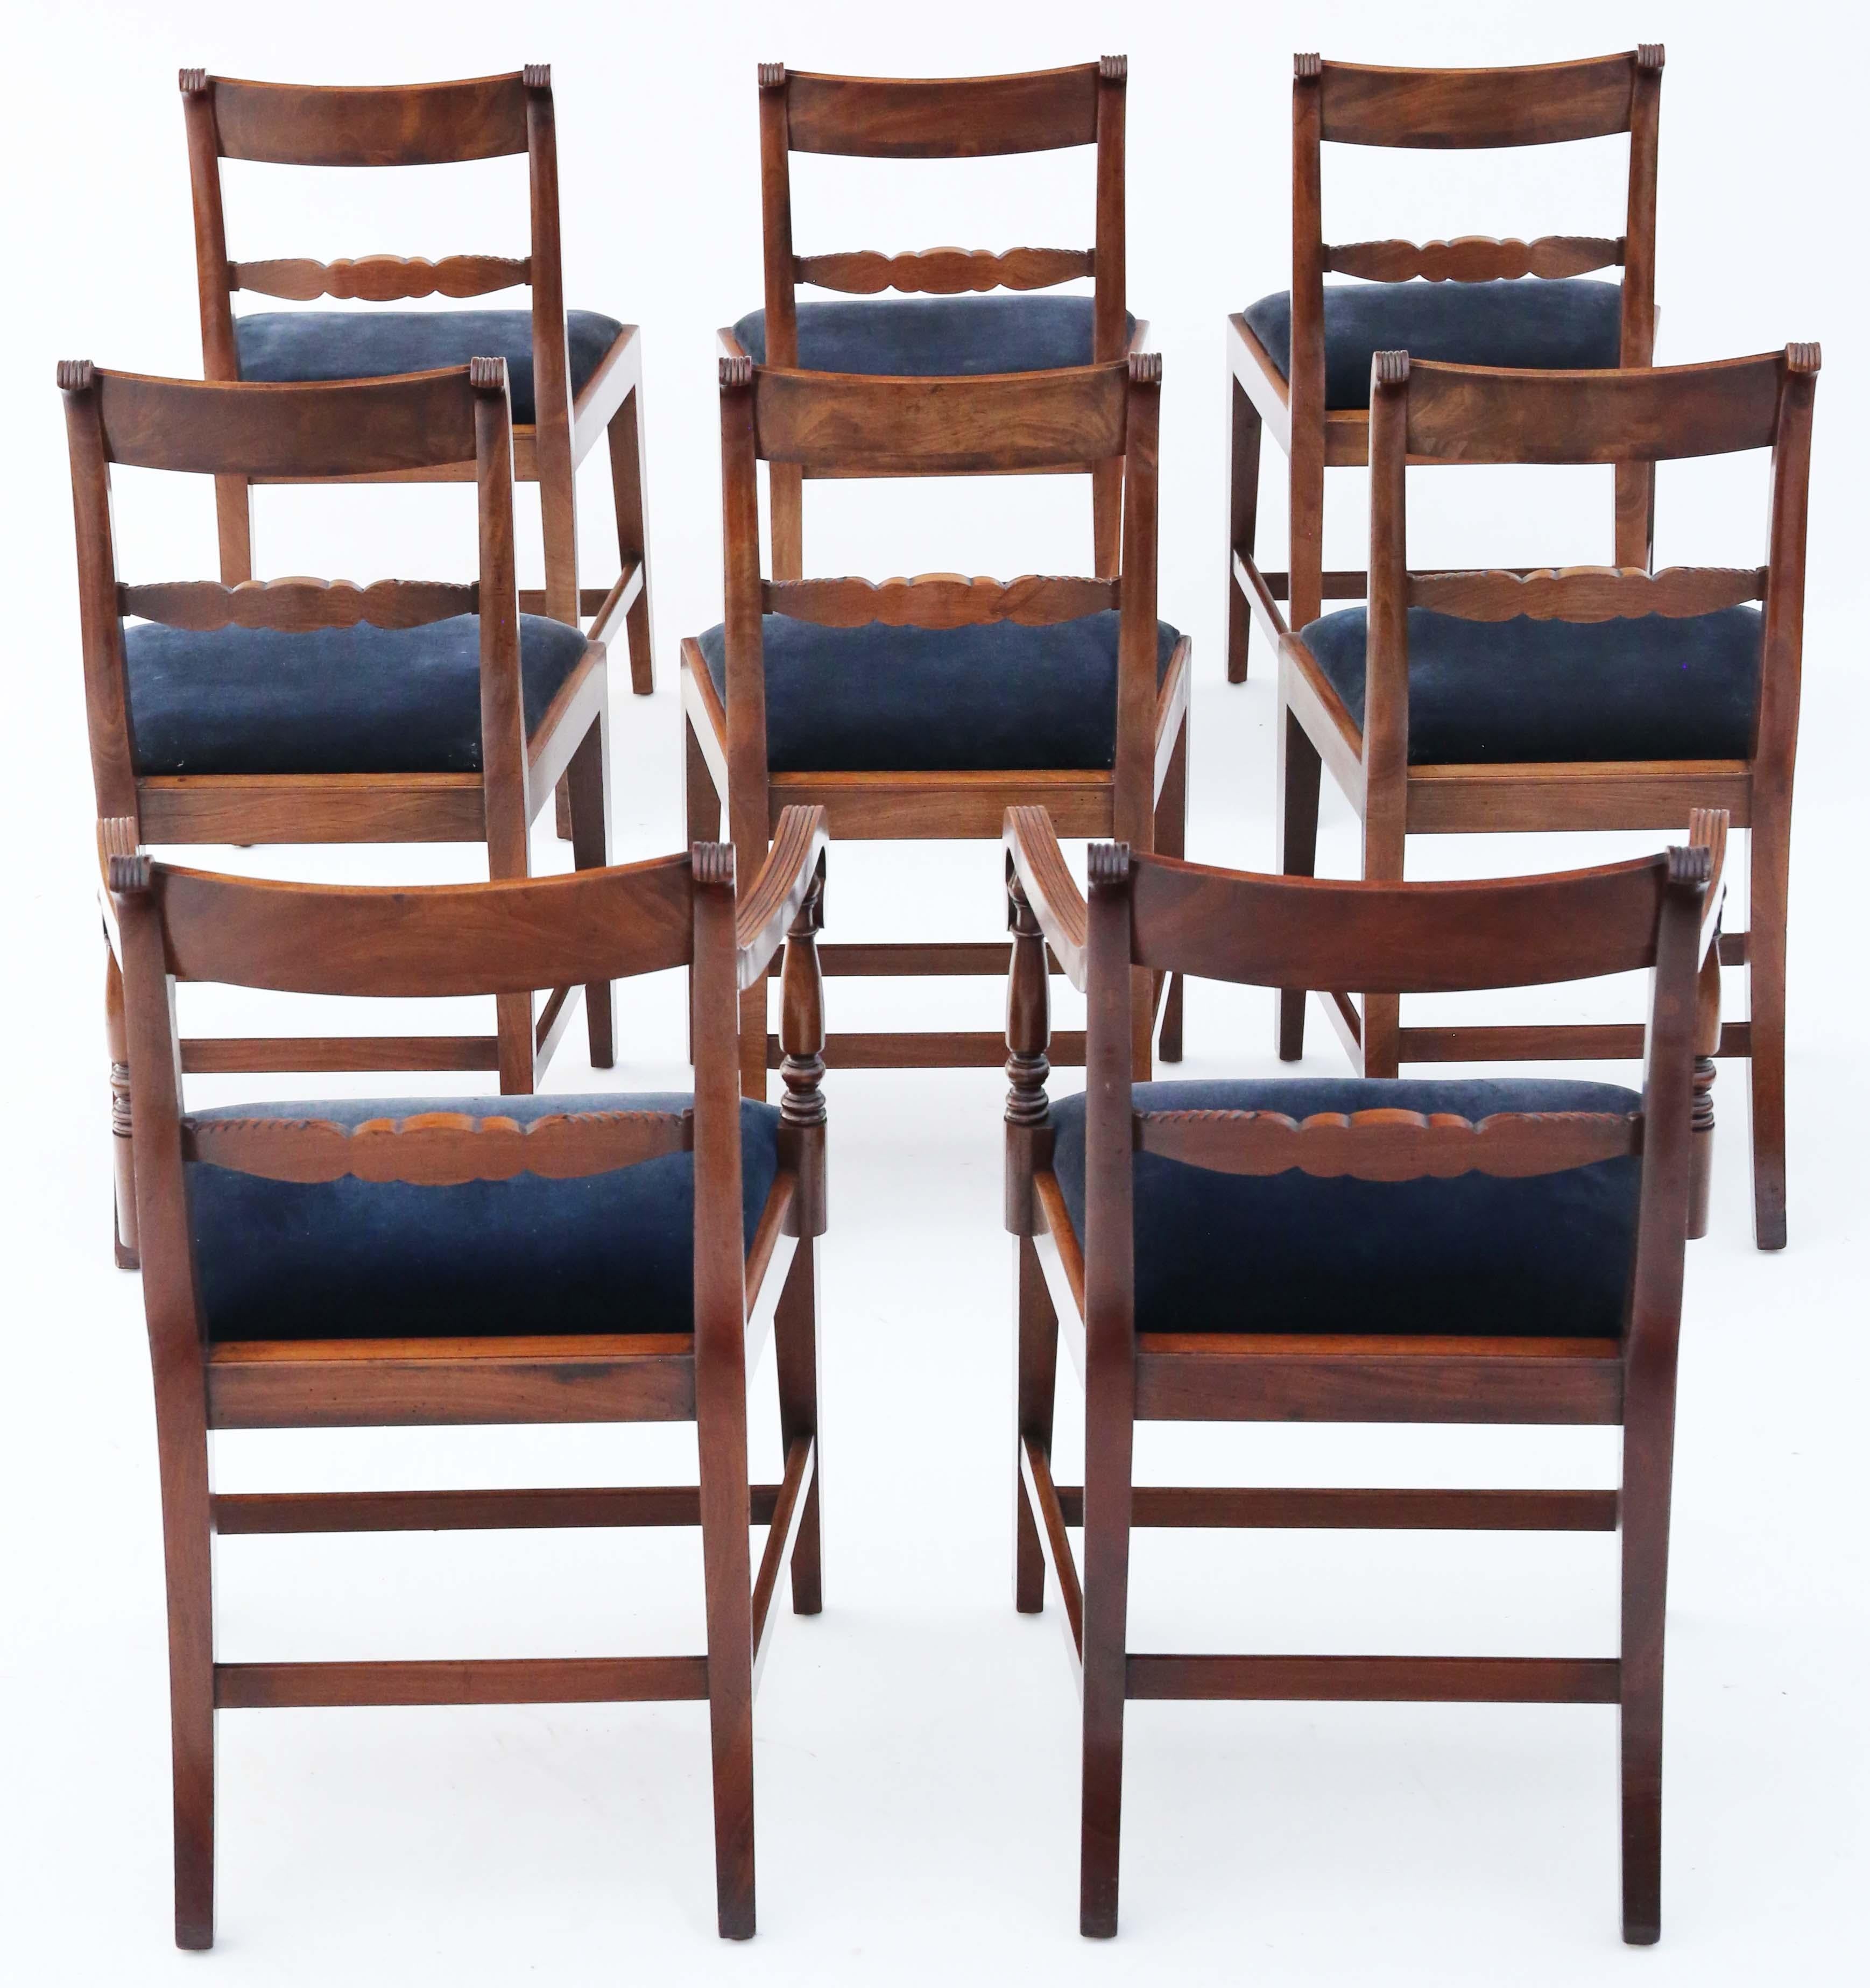 Antique fine quality set of 8 (6 plus 2) Regency mahogany dining chairs C1830 In Good Condition For Sale In Wisbech, Cambridgeshire